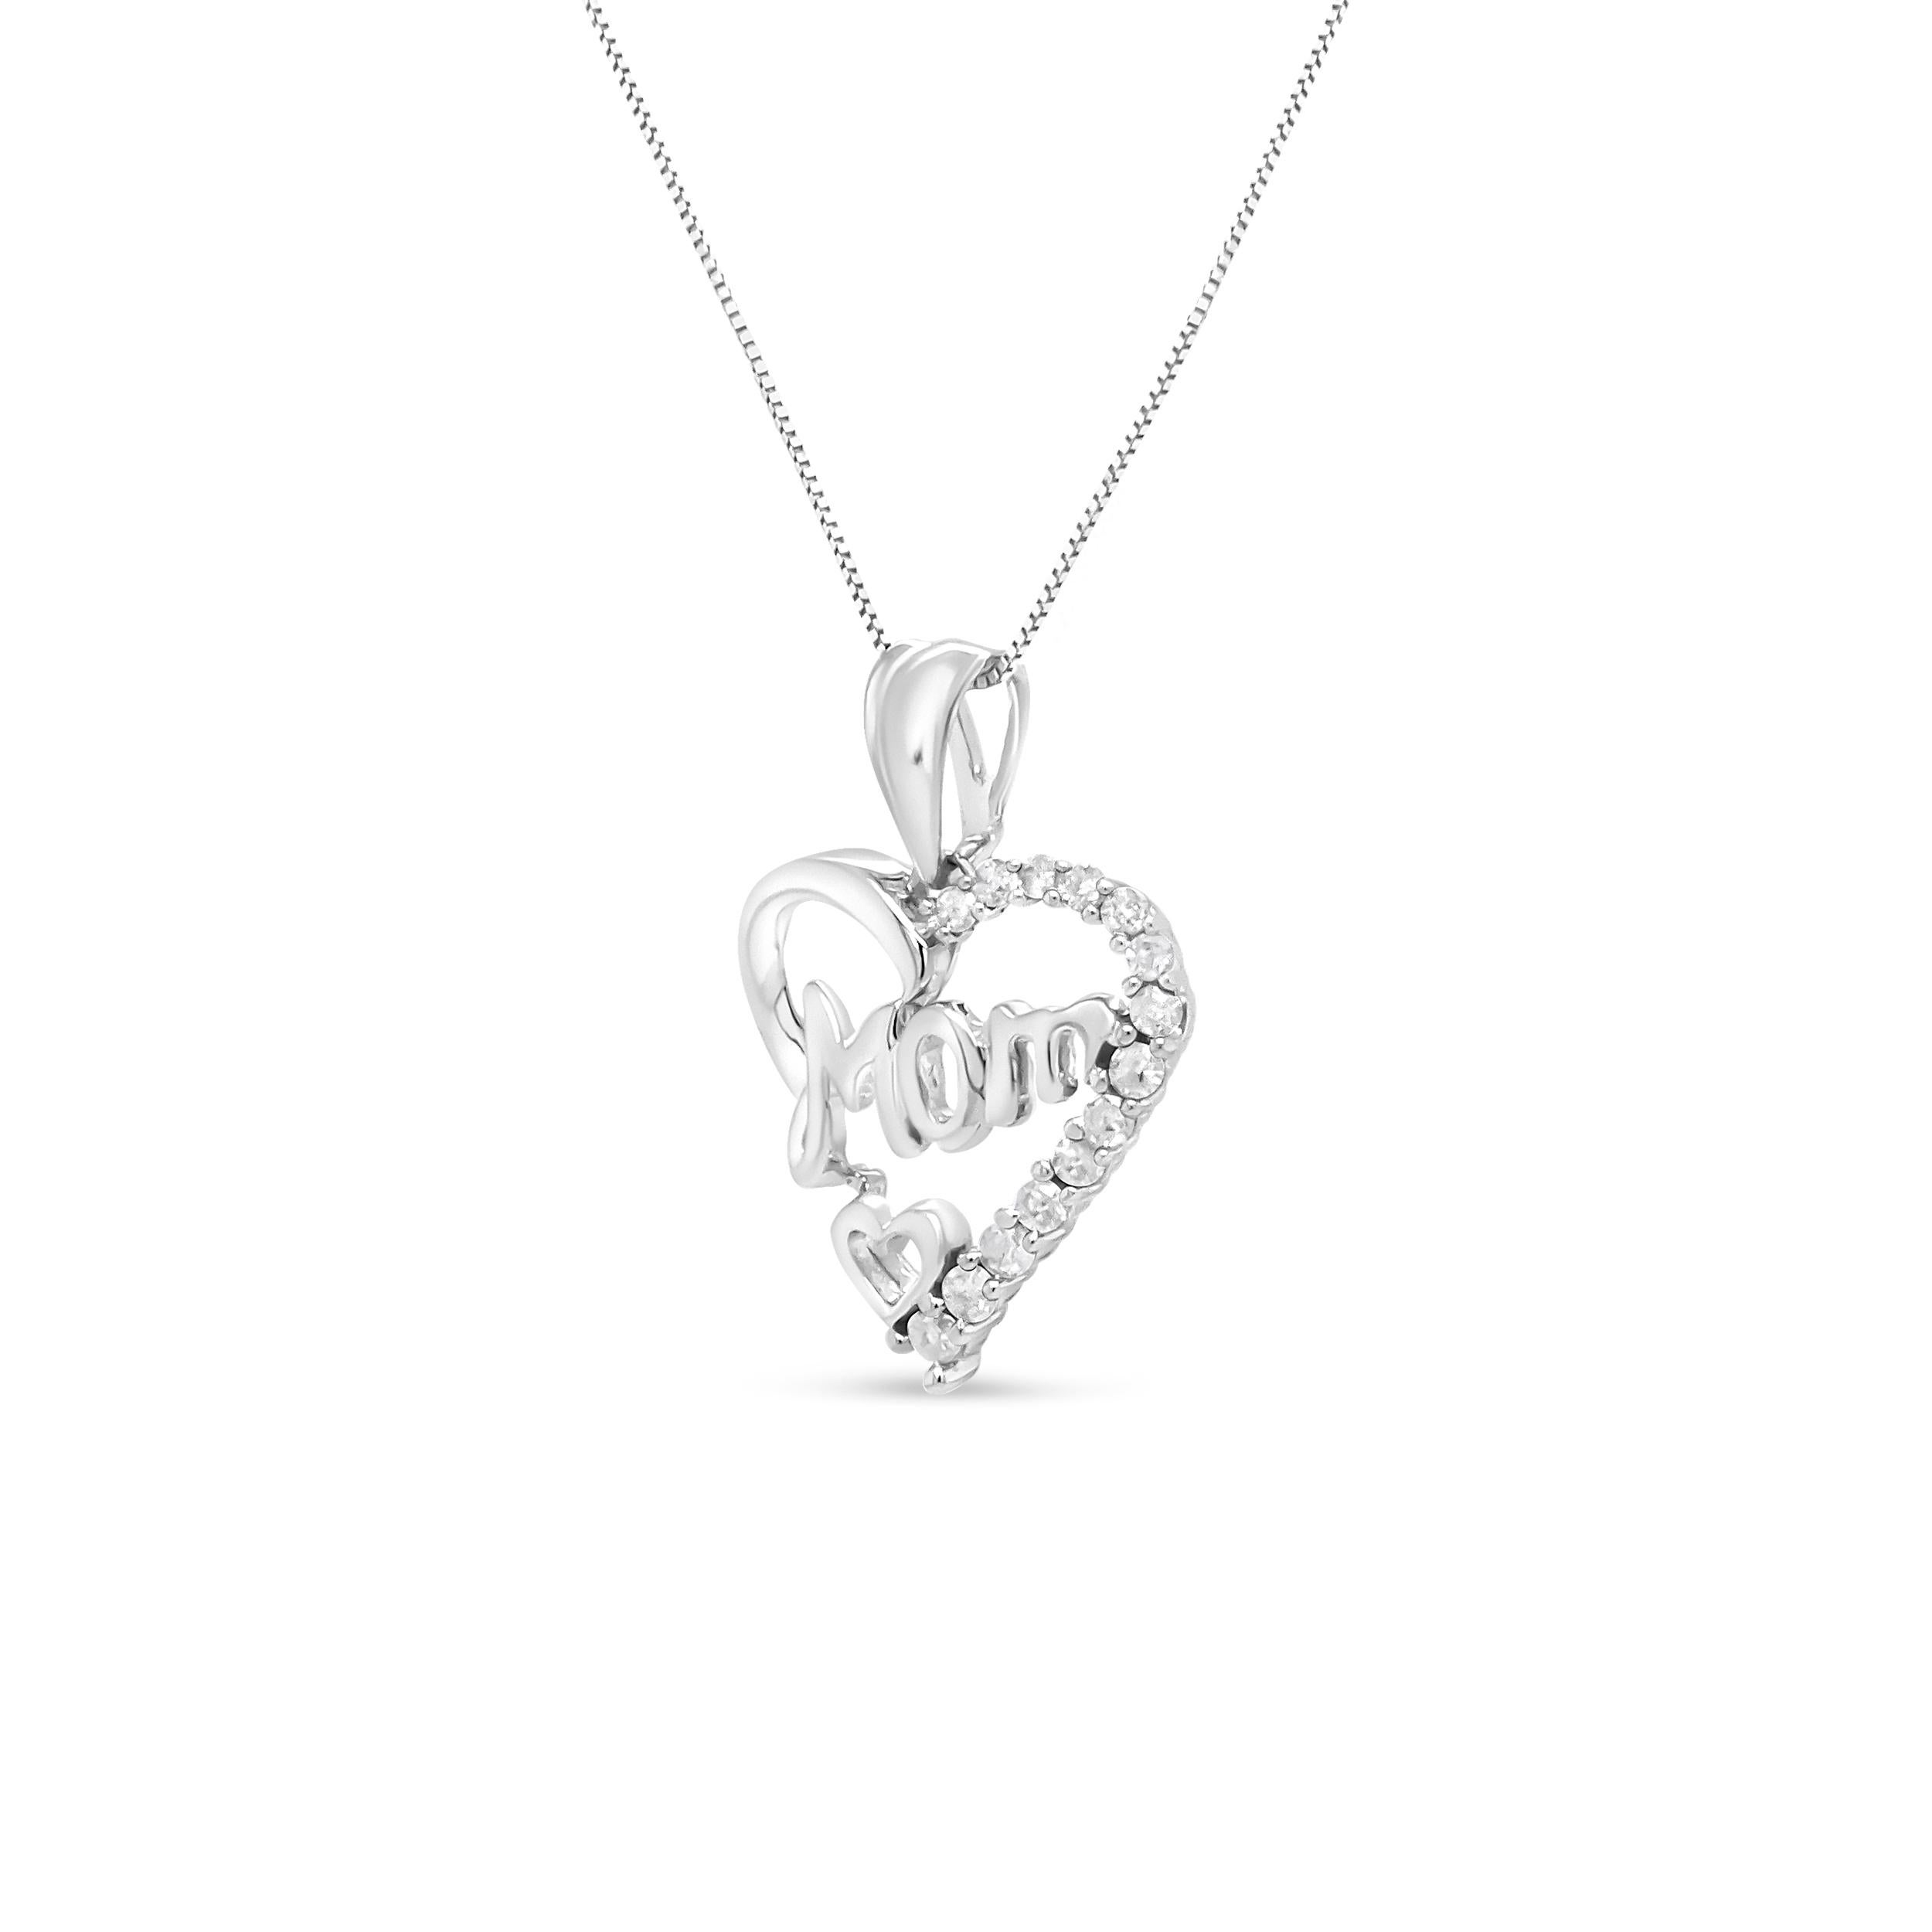 Make this Mother's Day -- or any day -- one for mom to remember by gifting her this sweet diamond heart pendant necklace. This delightful piece is fashioned in an open heart with the word 